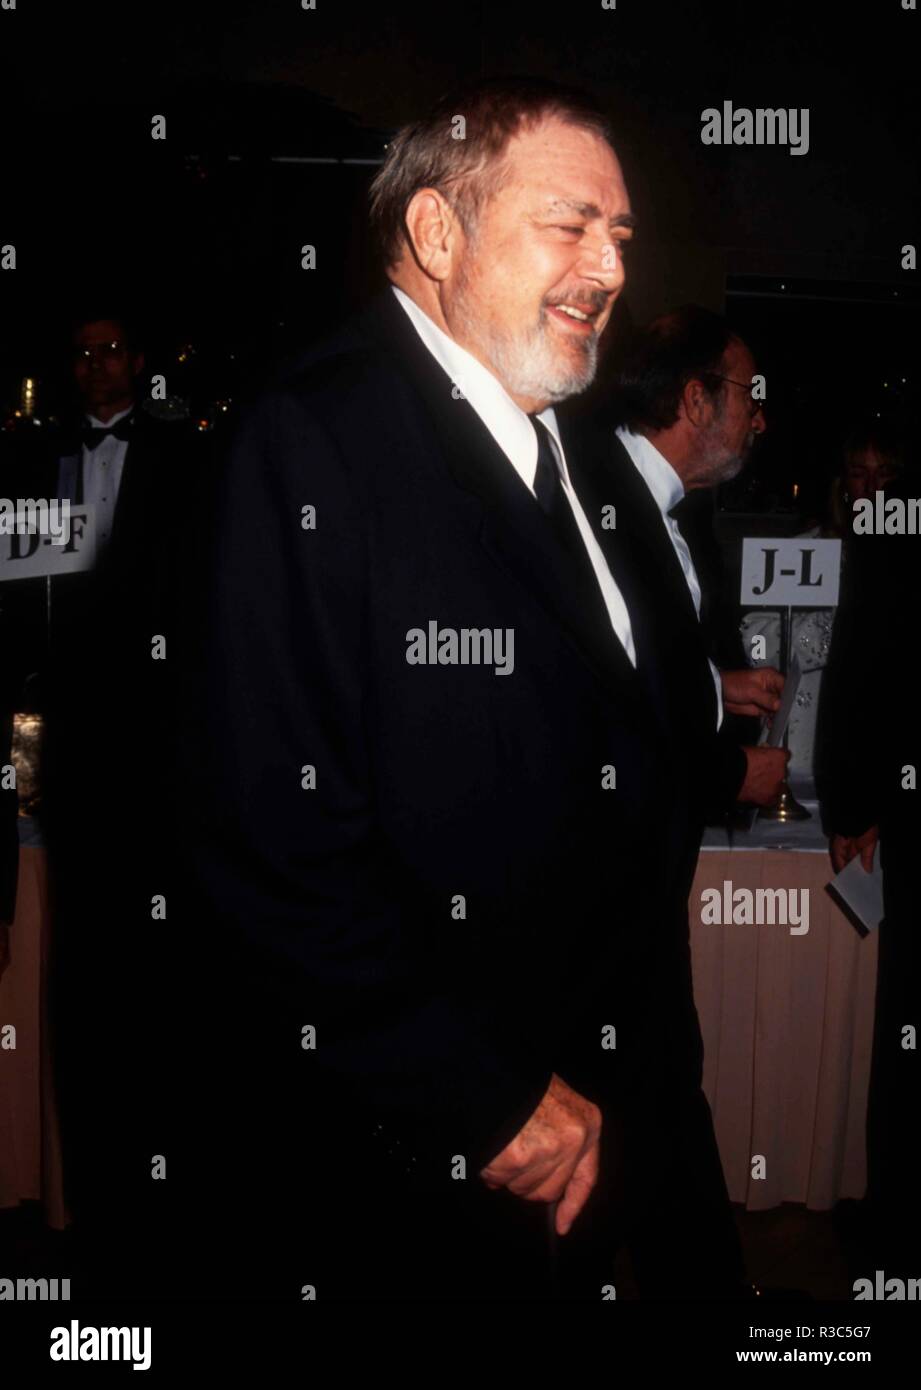 BEVERLY HILLS, CA - JANUARY 29: Actor Raymond Burr attends The Daily Variety Salutes Army Archerd on January 29, 1993 at the Beverly Hilton Hotel in Beverly Hills, California. Photo by Barry King/Alamy Stock Photo Stock Photo